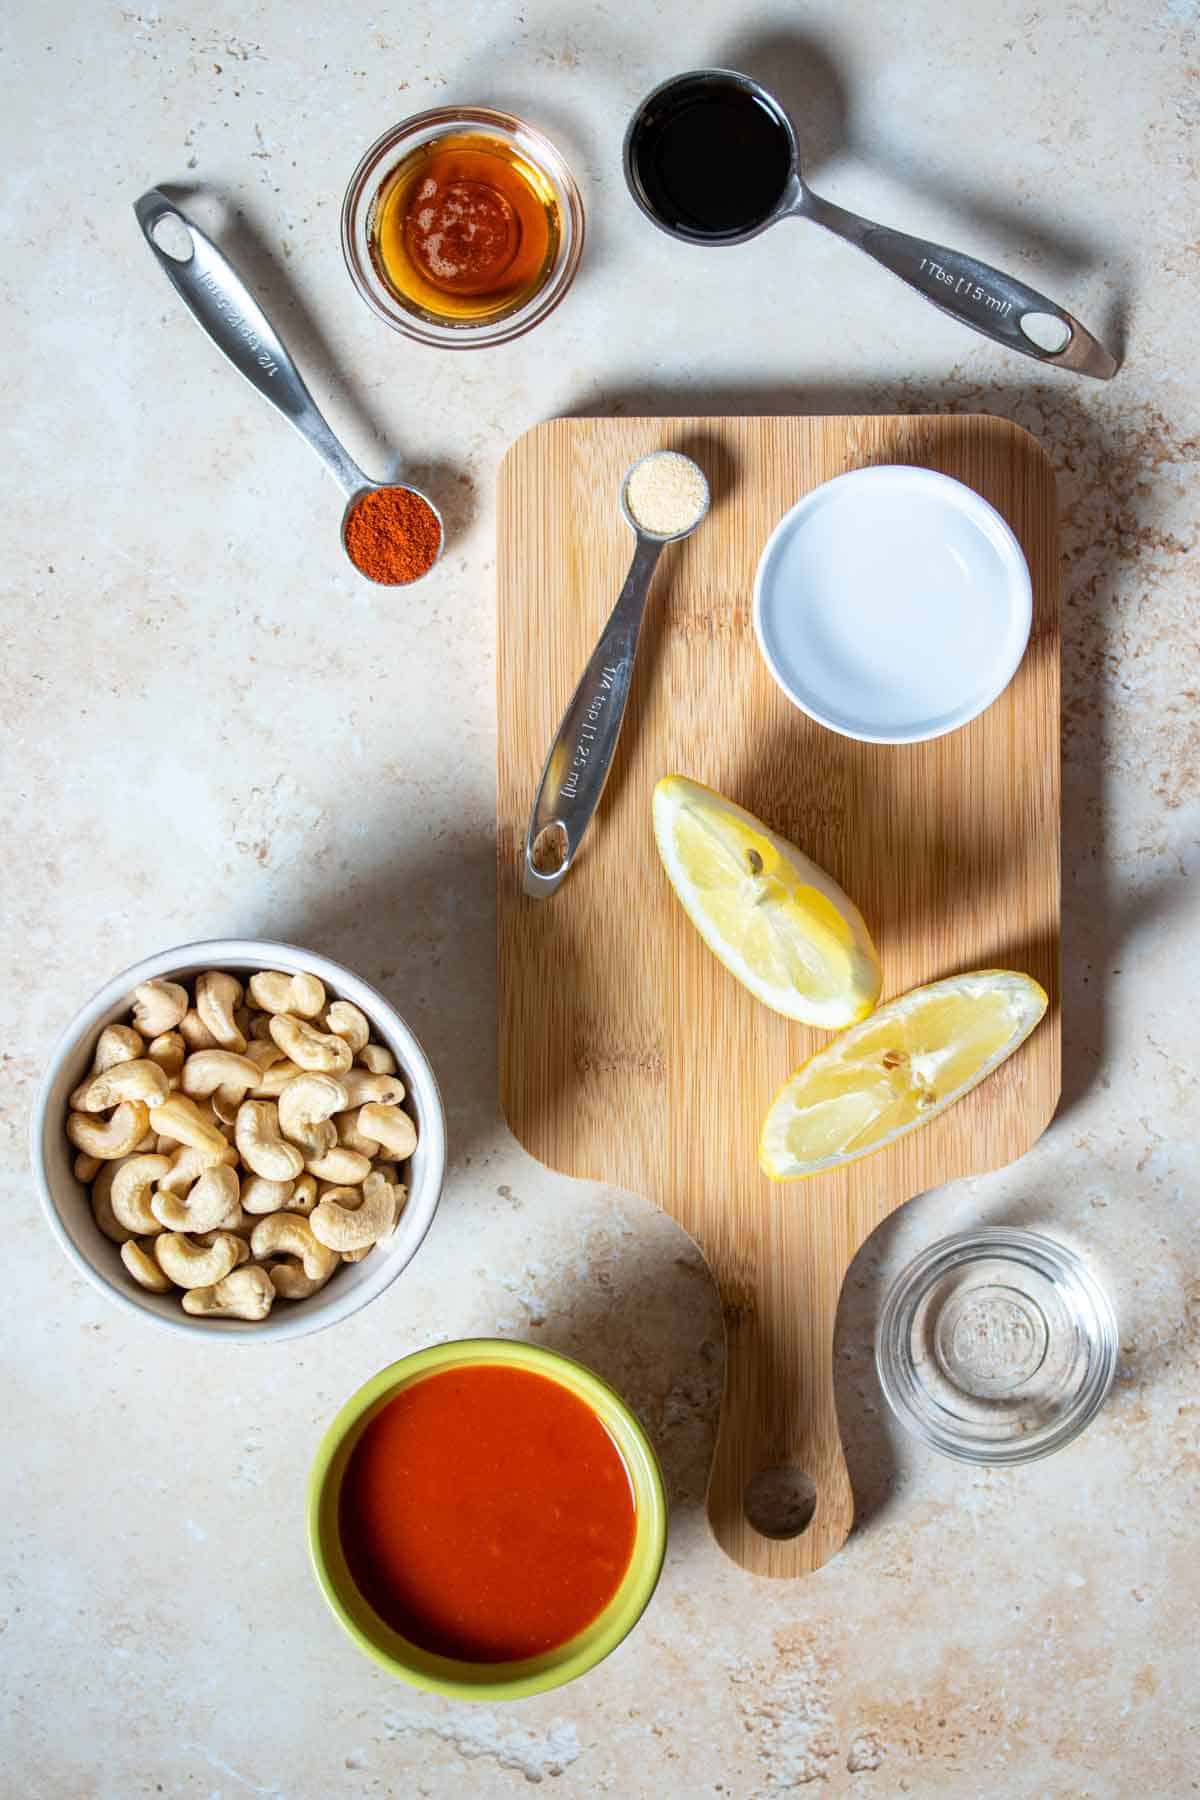 Top view of a tan surface with a cutting board and cashews, a red sauce in a bowl, lemon and other spices and liquids in small bowls and spoons.